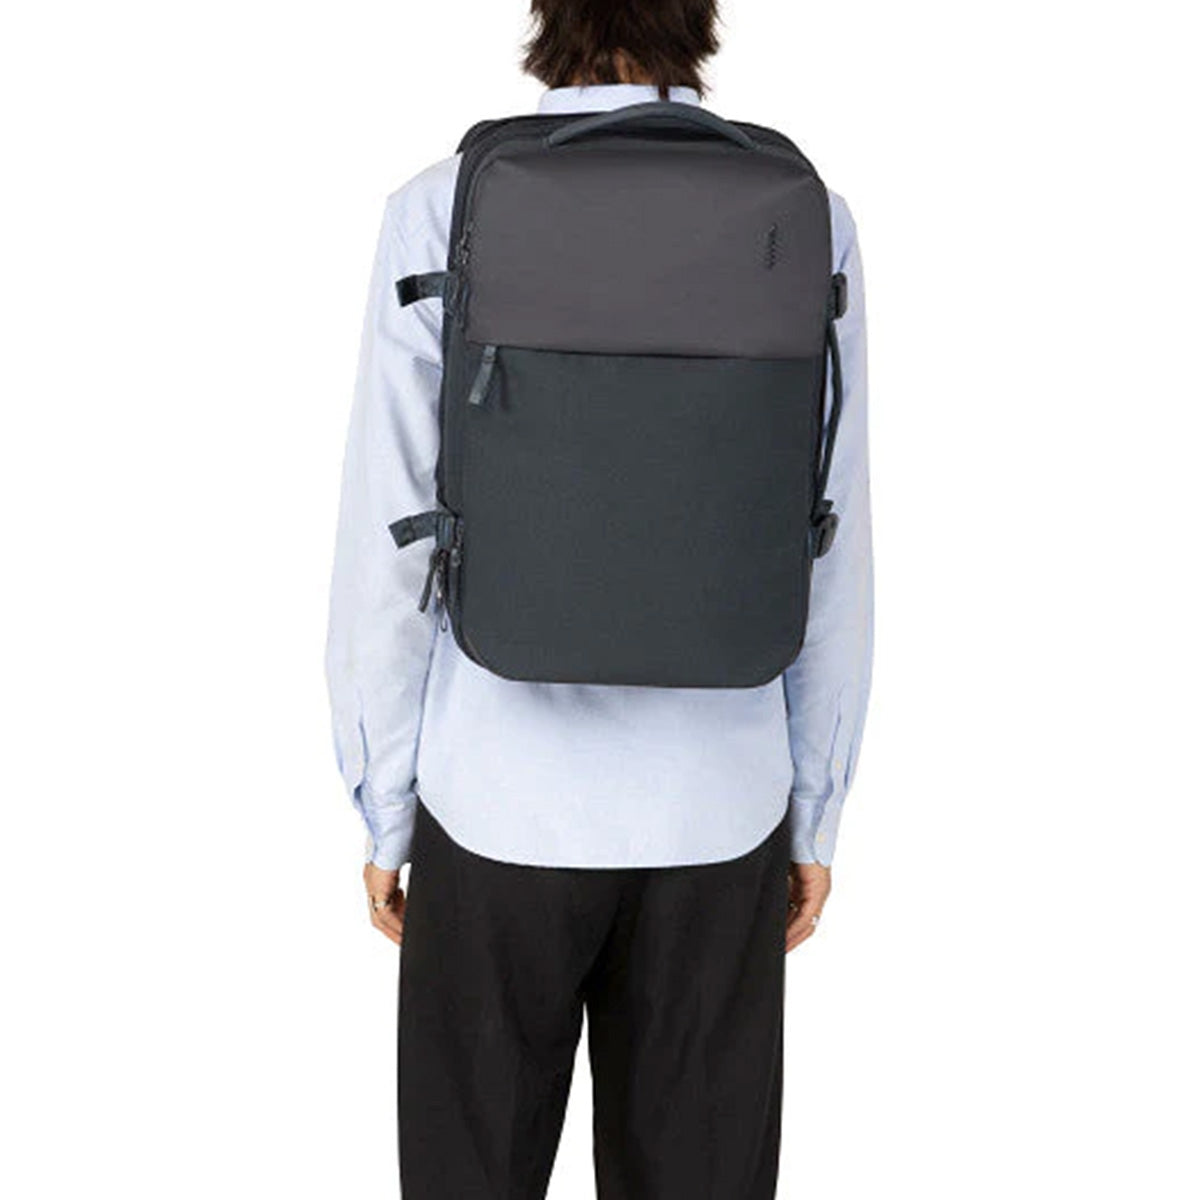 Incase A.R.C. Travel Pack (Navy)